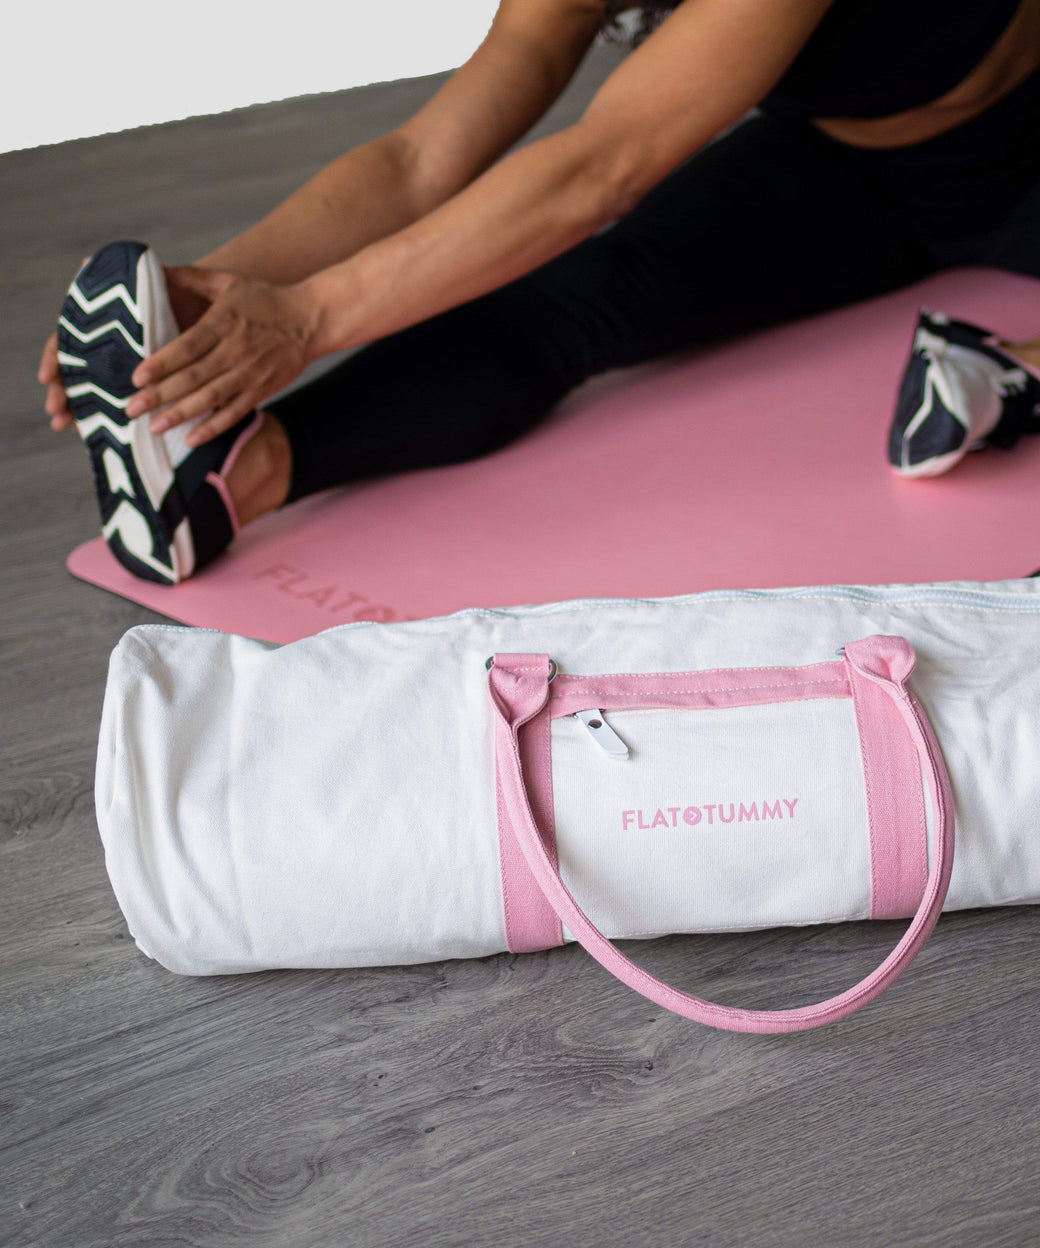 Workout From Home Kits For 5,000 S'poreans, Free Yoga Mat & Dumbbells  Included